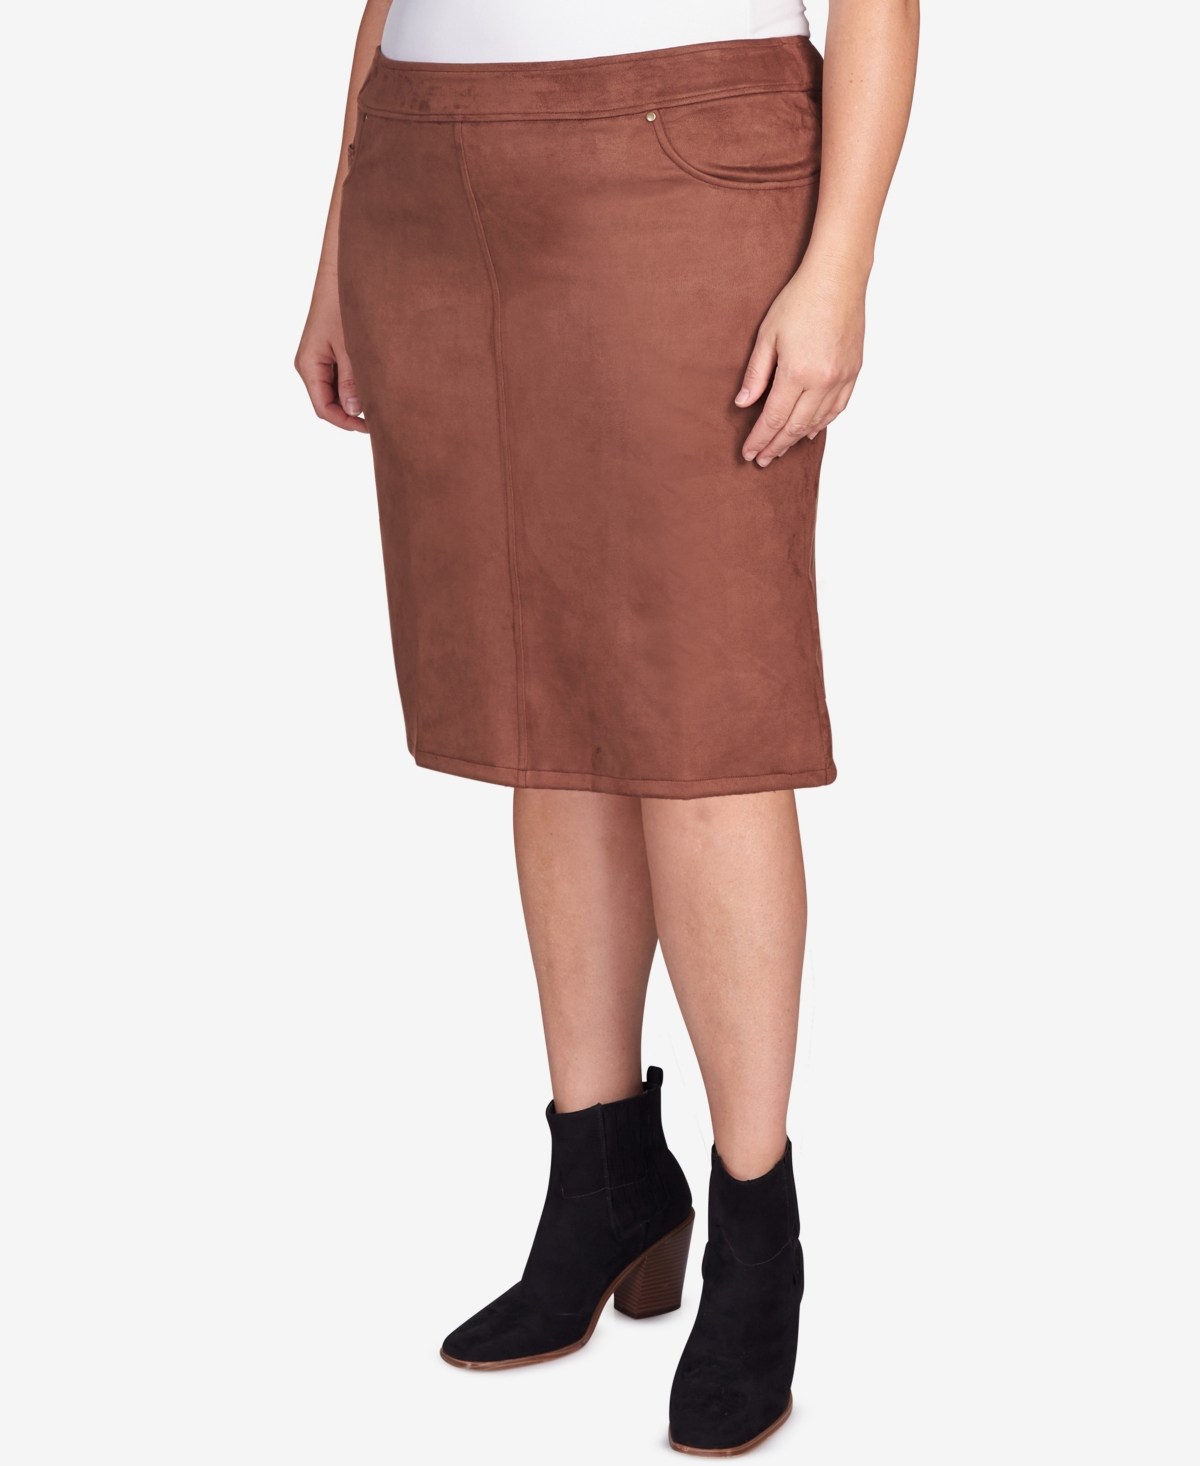 Plus Size Teal The Show Solid Faux Suede Skort - Cocoa